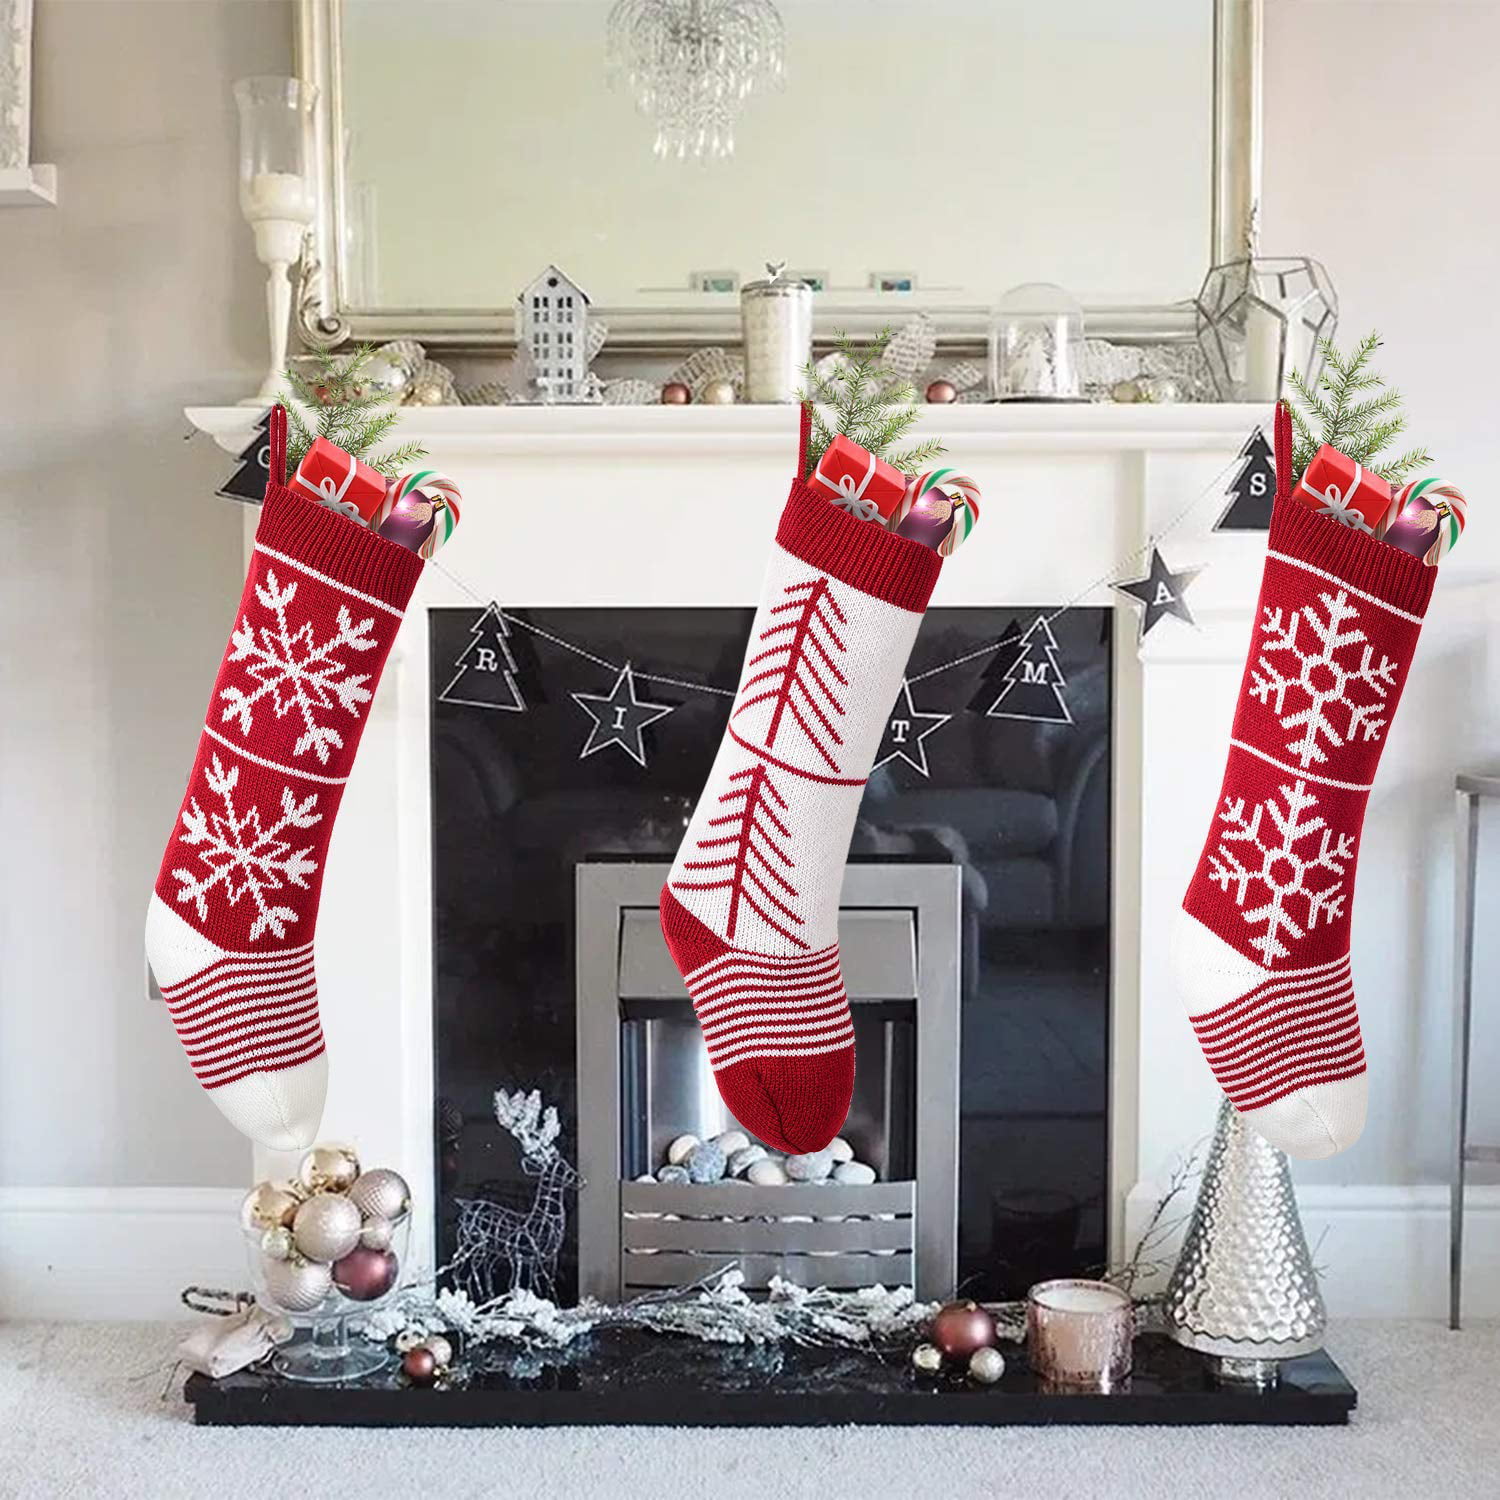 Coolmade Christmas Stockings, 3 Pack 18 inches Large Luxury Knit